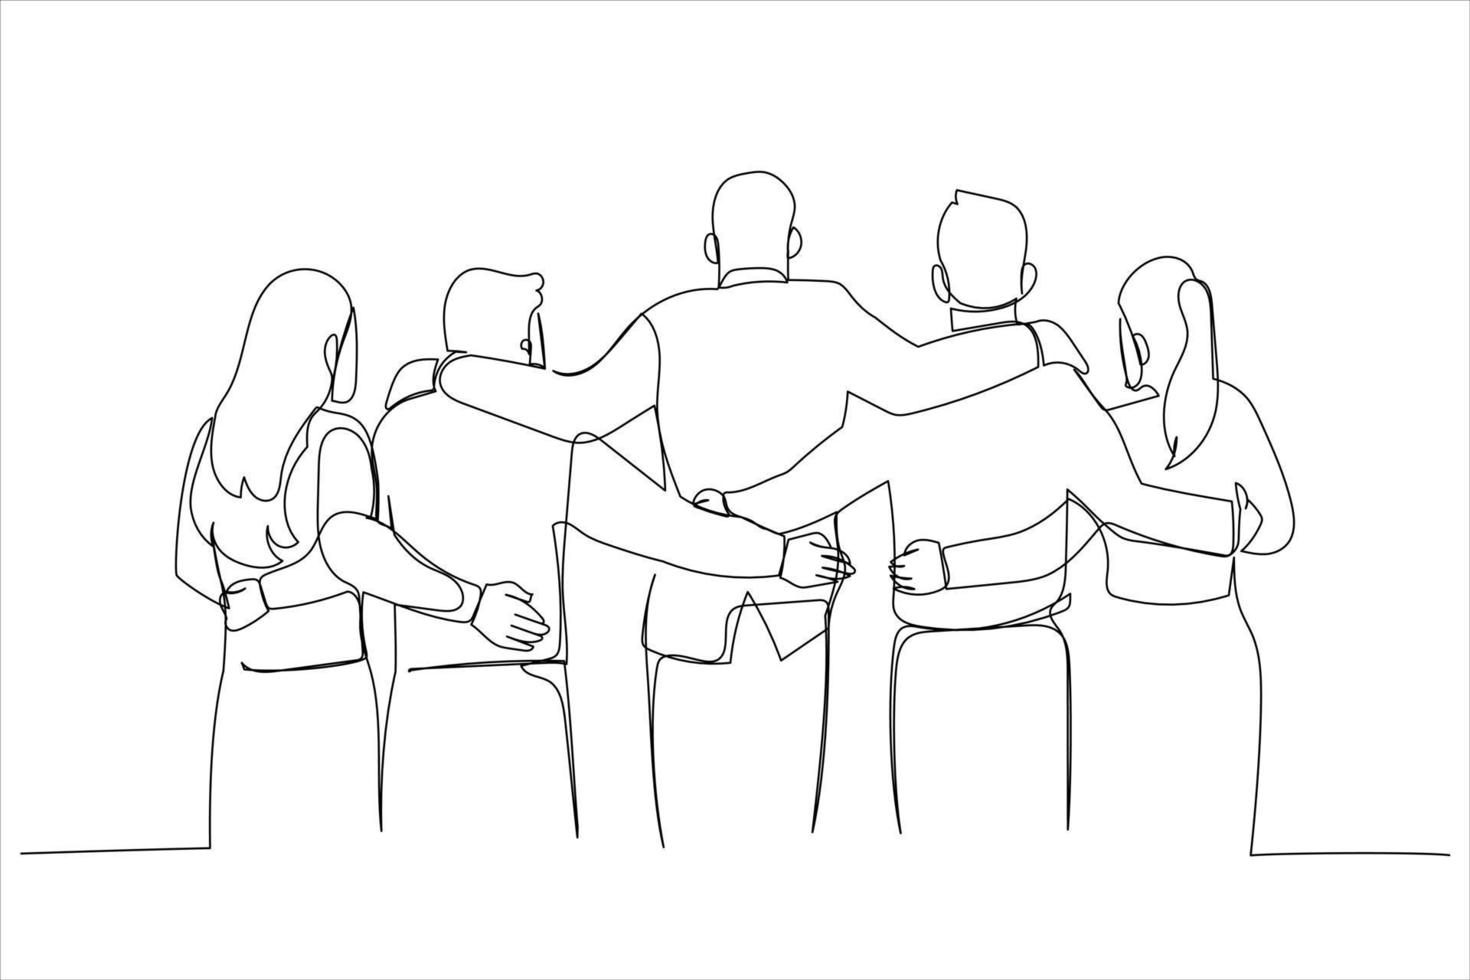 Illustration of people hug standing in a row with their backs to the camera and looking out the window. One line art style vector